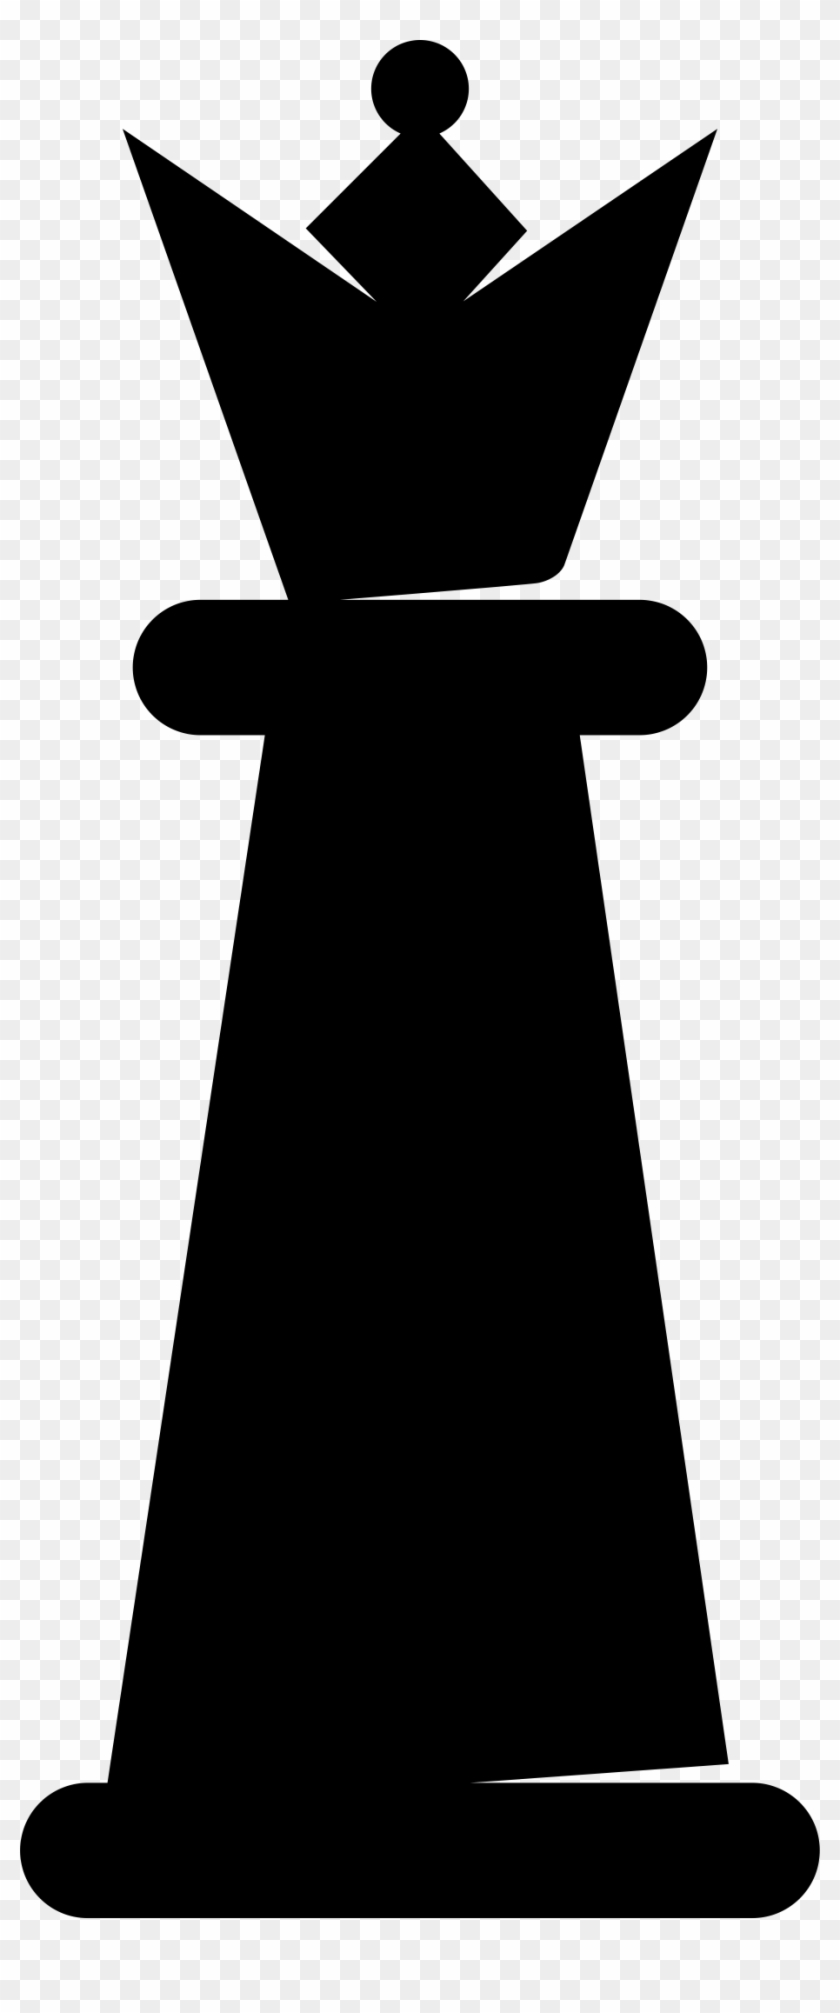 Big Image - Queen Chess Piece Clipart #204998